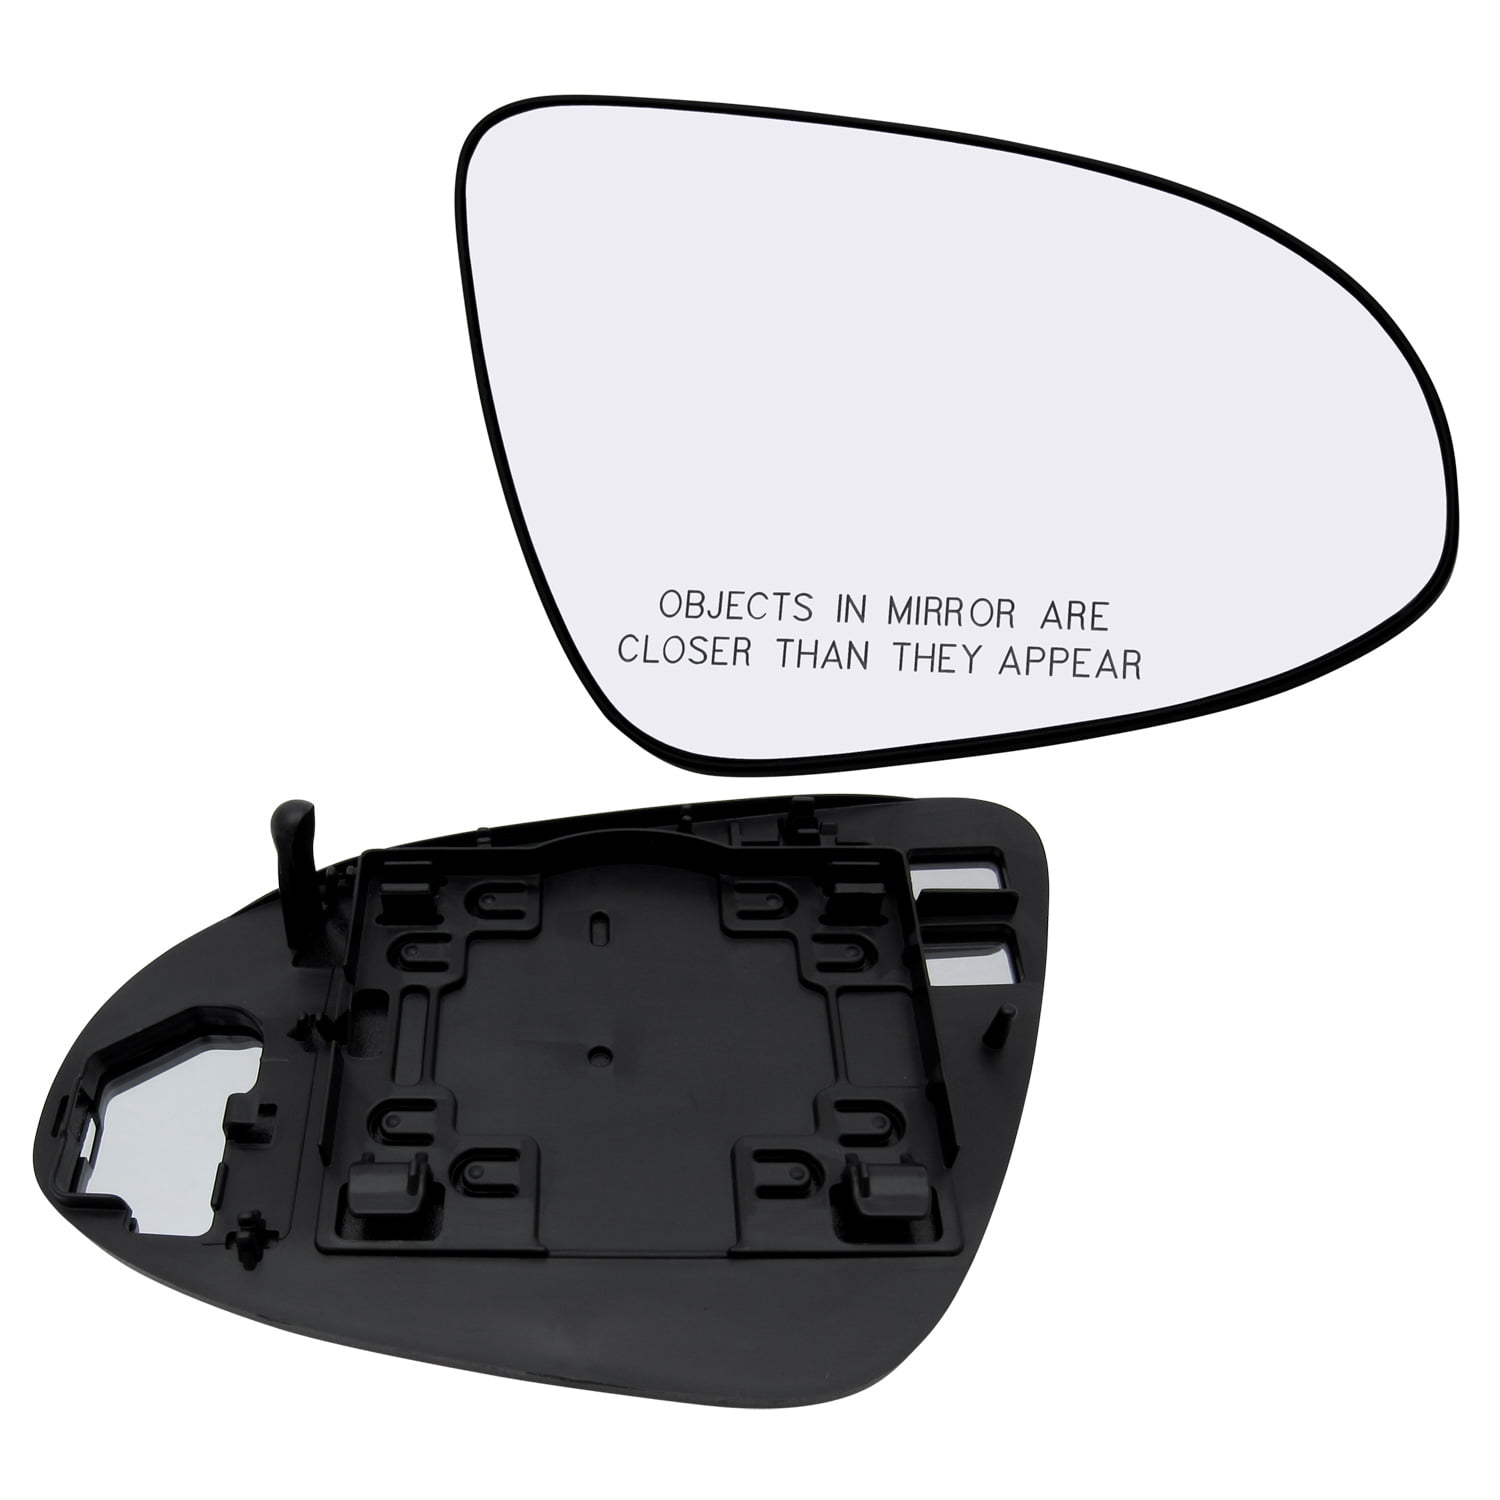 New Replacement Passenger Side Mirror Glass With Backing For Motor Mount Fits 2013-2018 Toyota 2017 Toyota Camry Side Mirror Glass Replacement